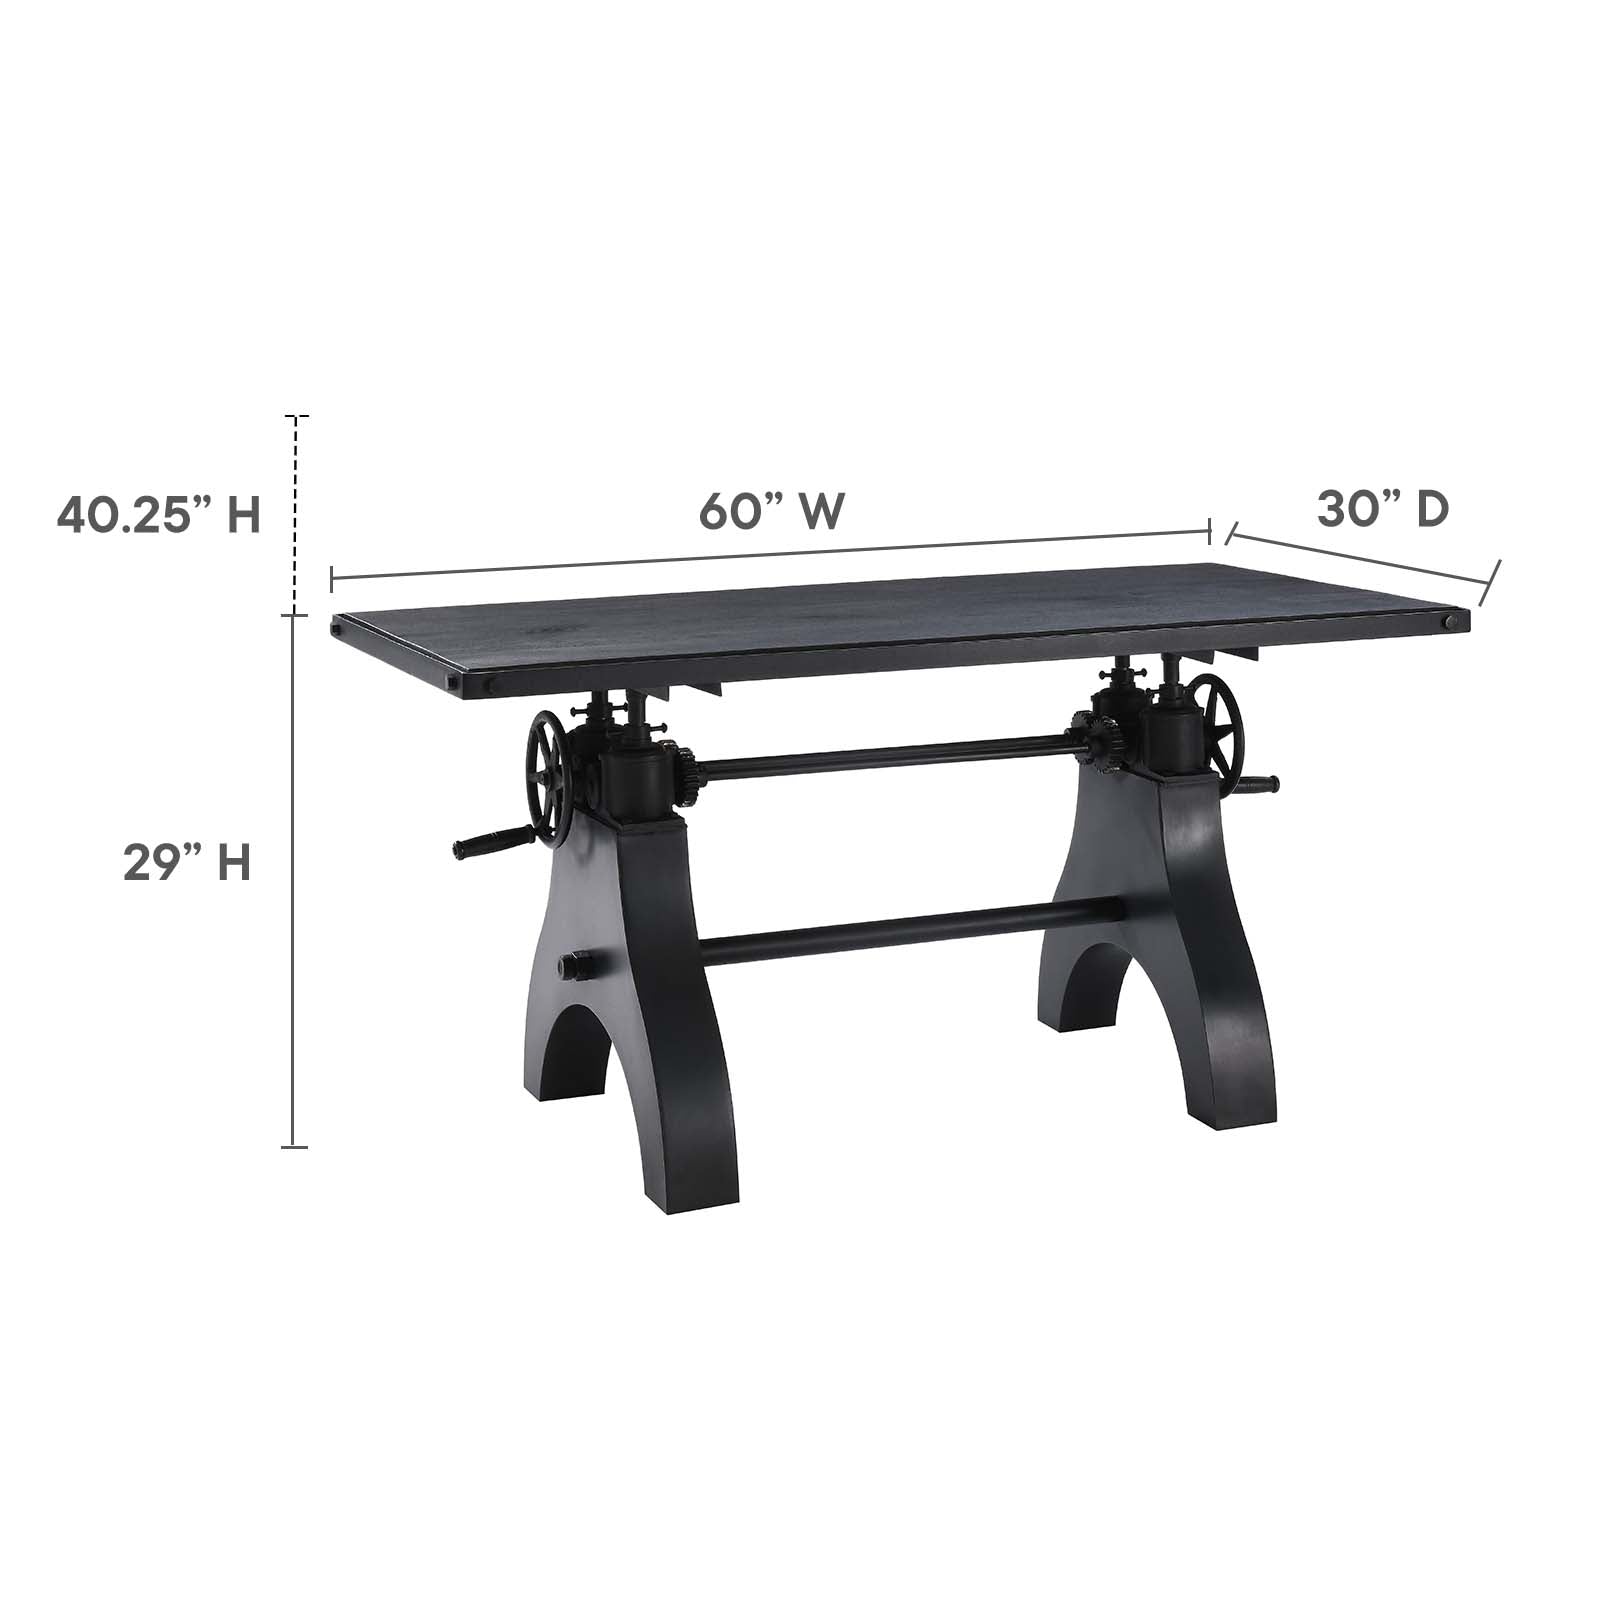 Genuine 60" Crank Adjustable Height Dining Table and Computer Desk By Modway - EEI-6148 | Dining Tables | Modway - 10